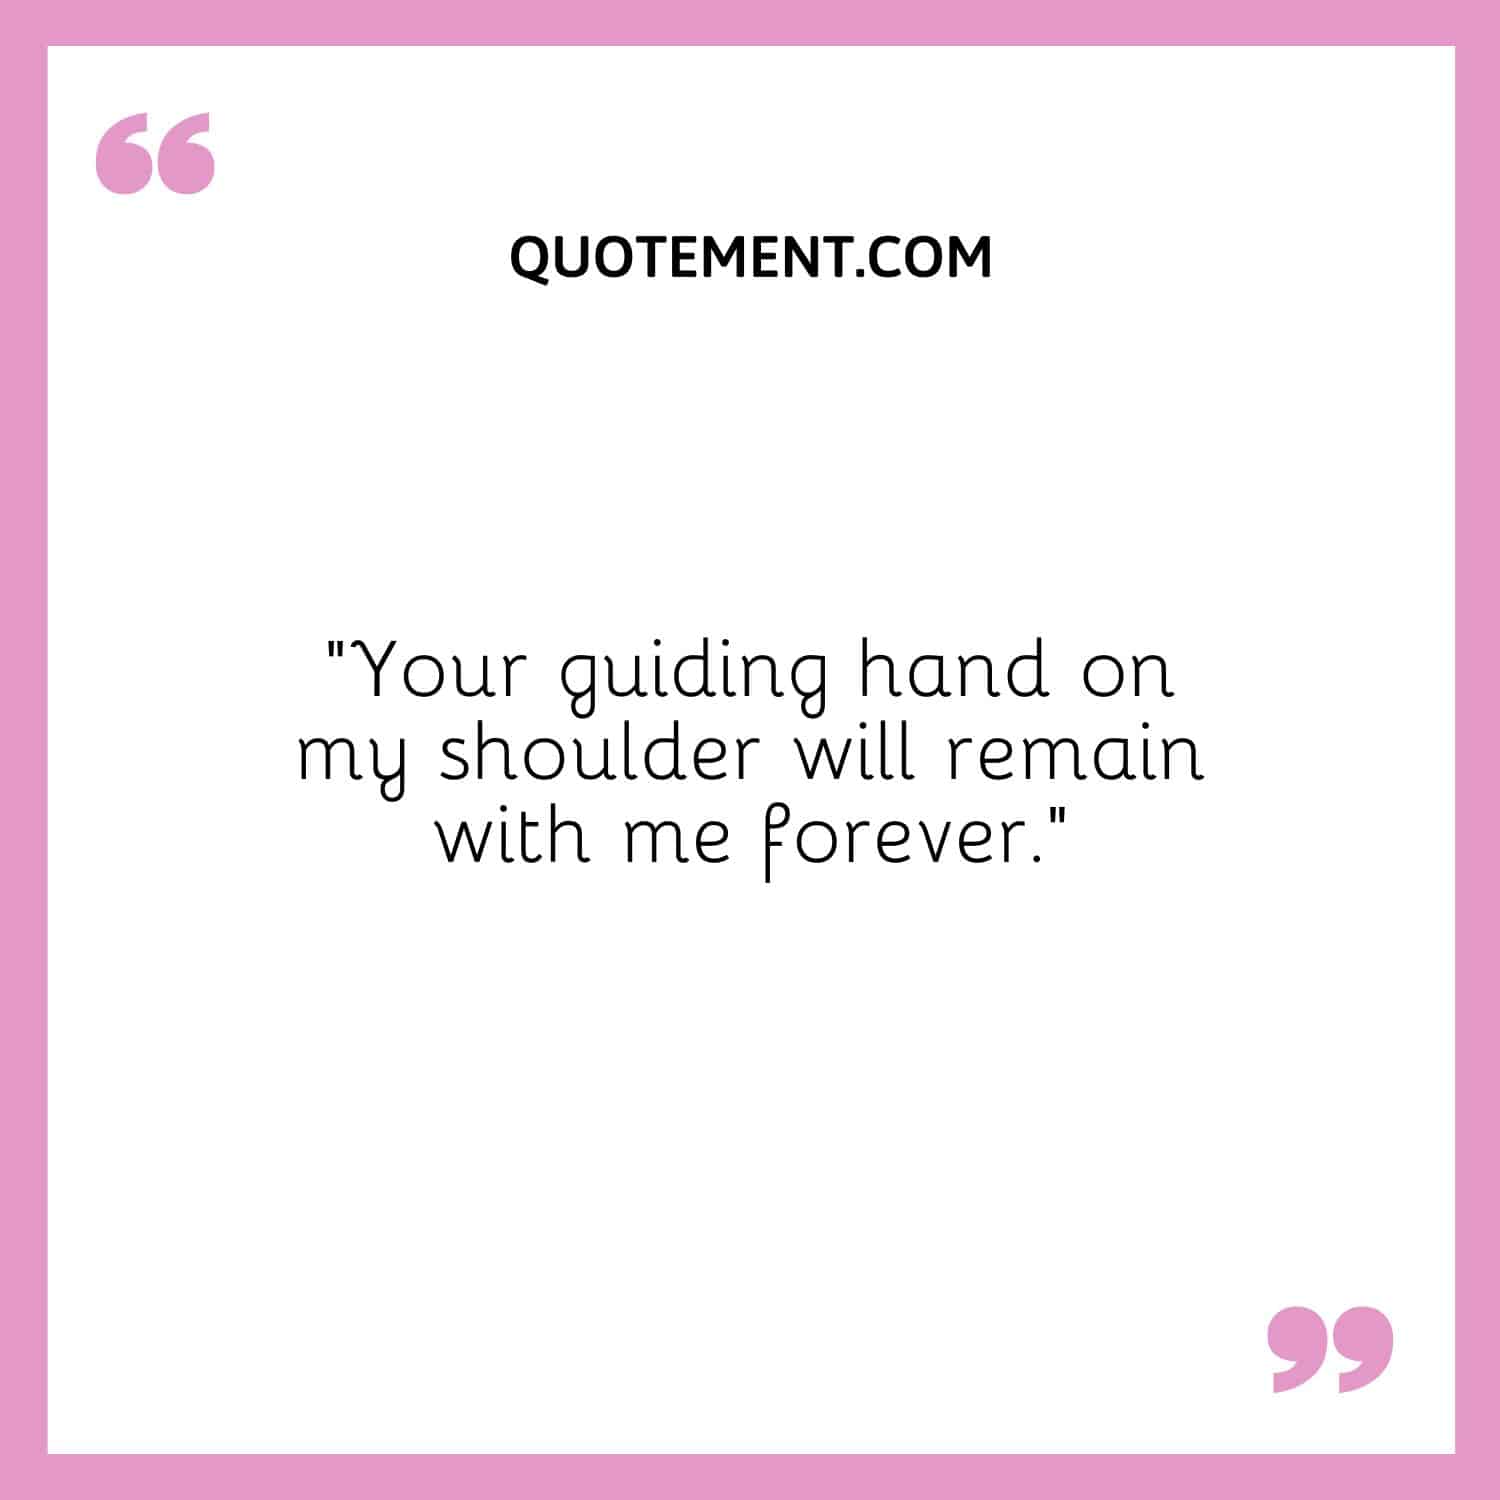 Your guiding hand on my shoulder will remain with me forever